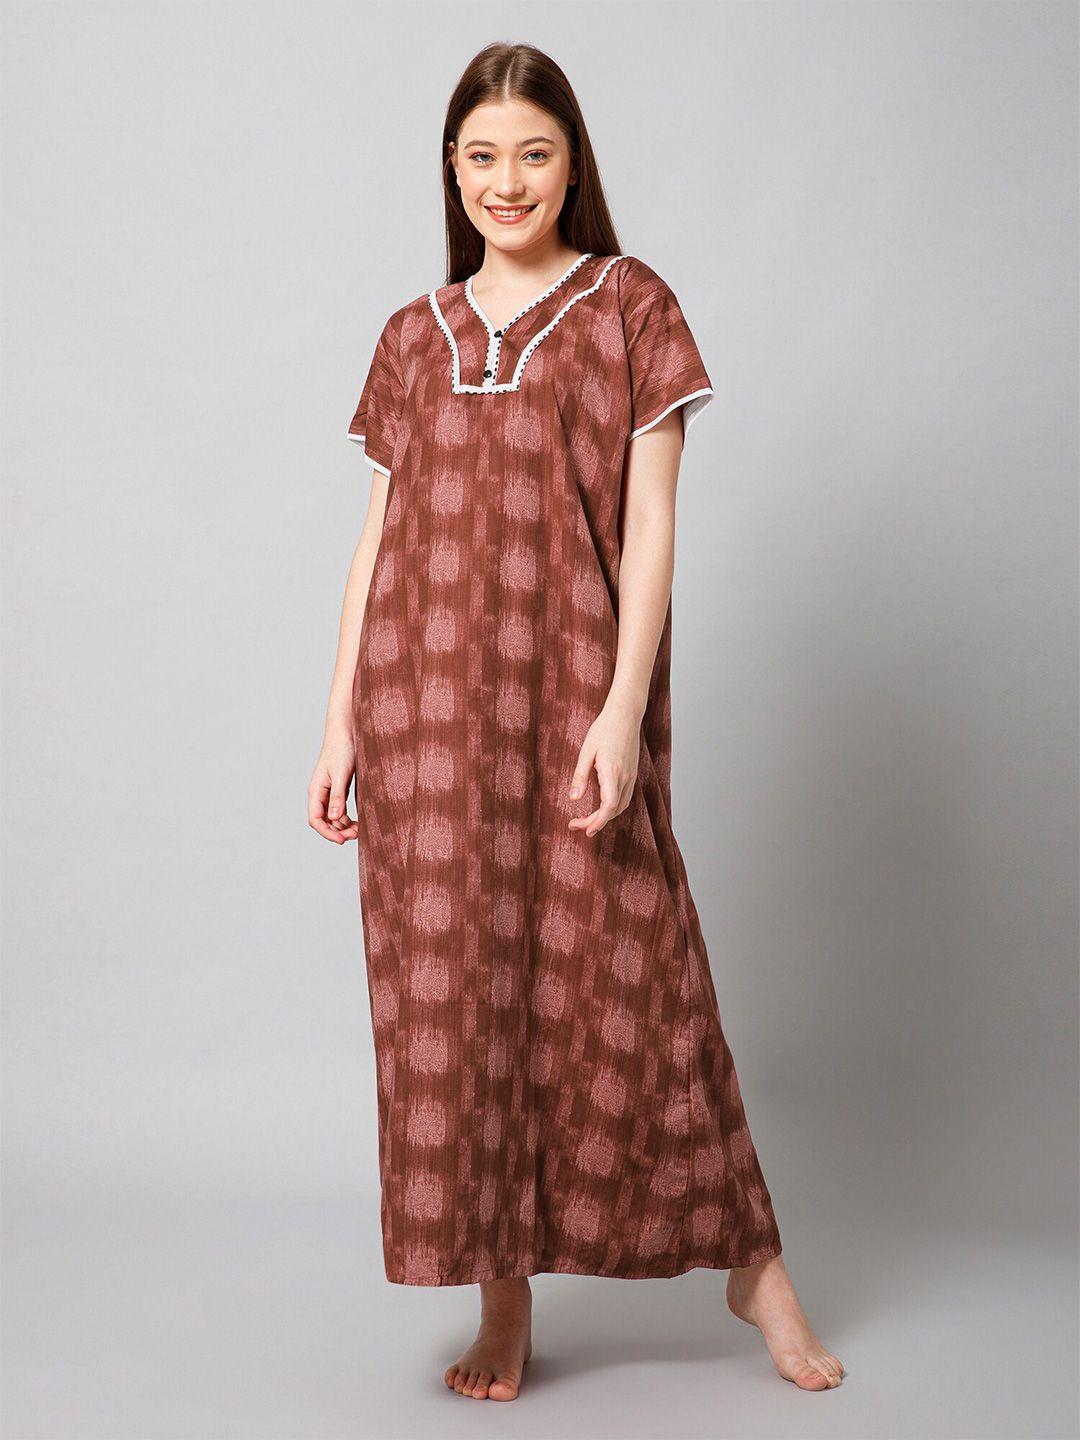 winza designer abstract printed pure cotton maxi nightdress